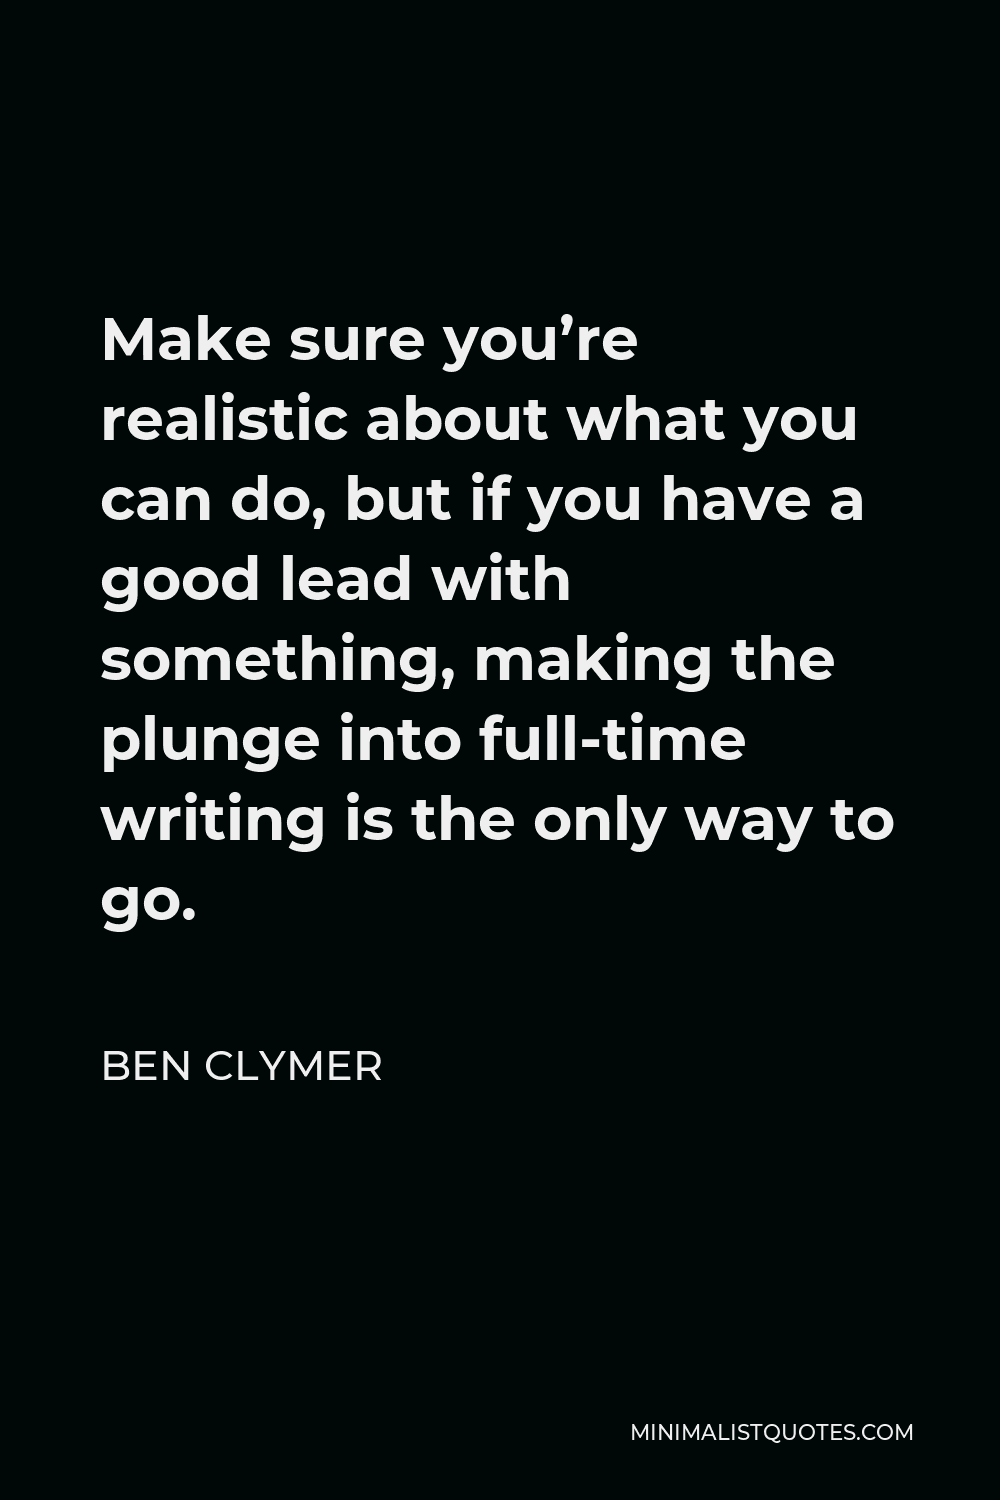 Ben Clymer Quote - Make sure you’re realistic about what you can do, but if you have a good lead with something, making the plunge into full-time writing is the only way to go.